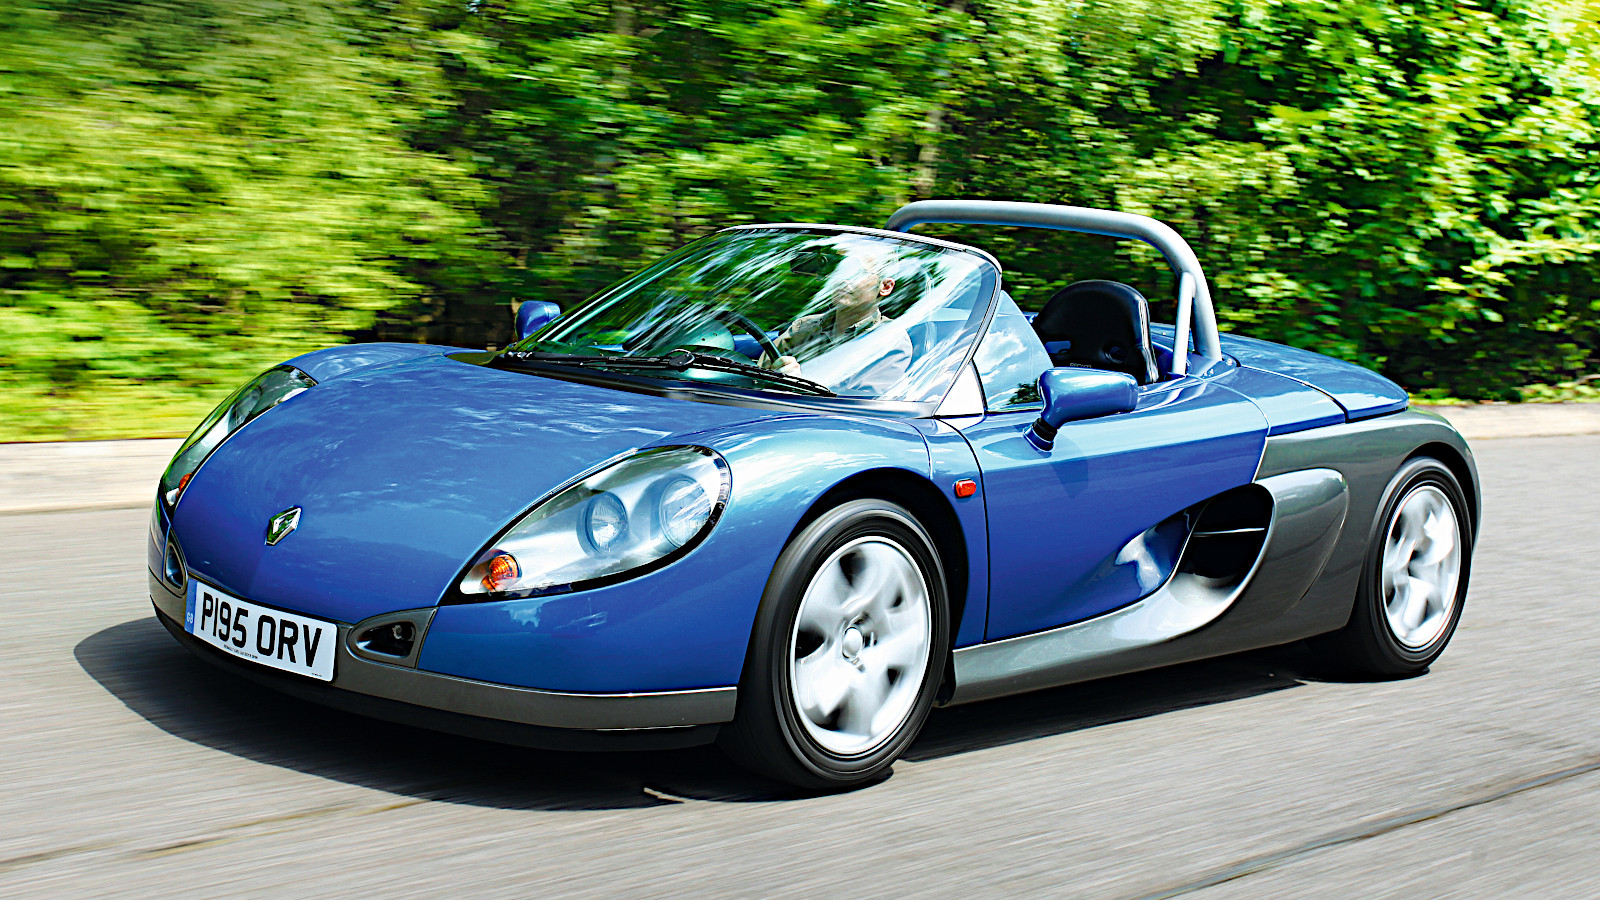 The Renault Sport Spider Is A Rare Open-Top Roadster From One Of